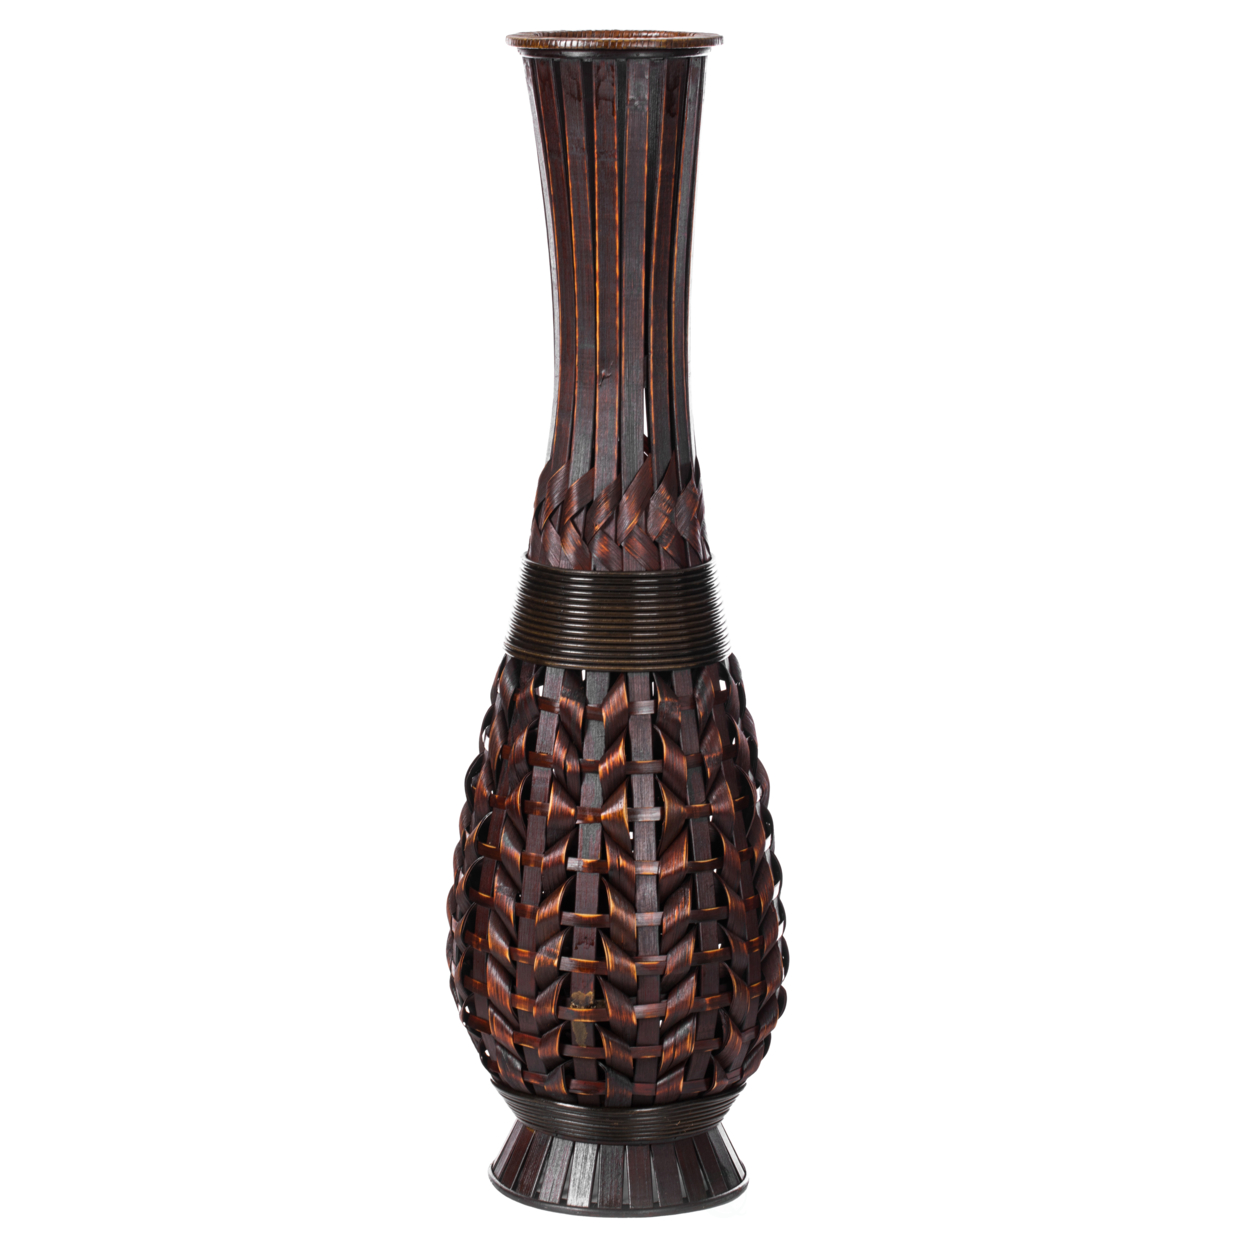 Antique Trumpet Style Floor Vase, For Entryway Or Living Room, Brown 36 Tall Bamboo